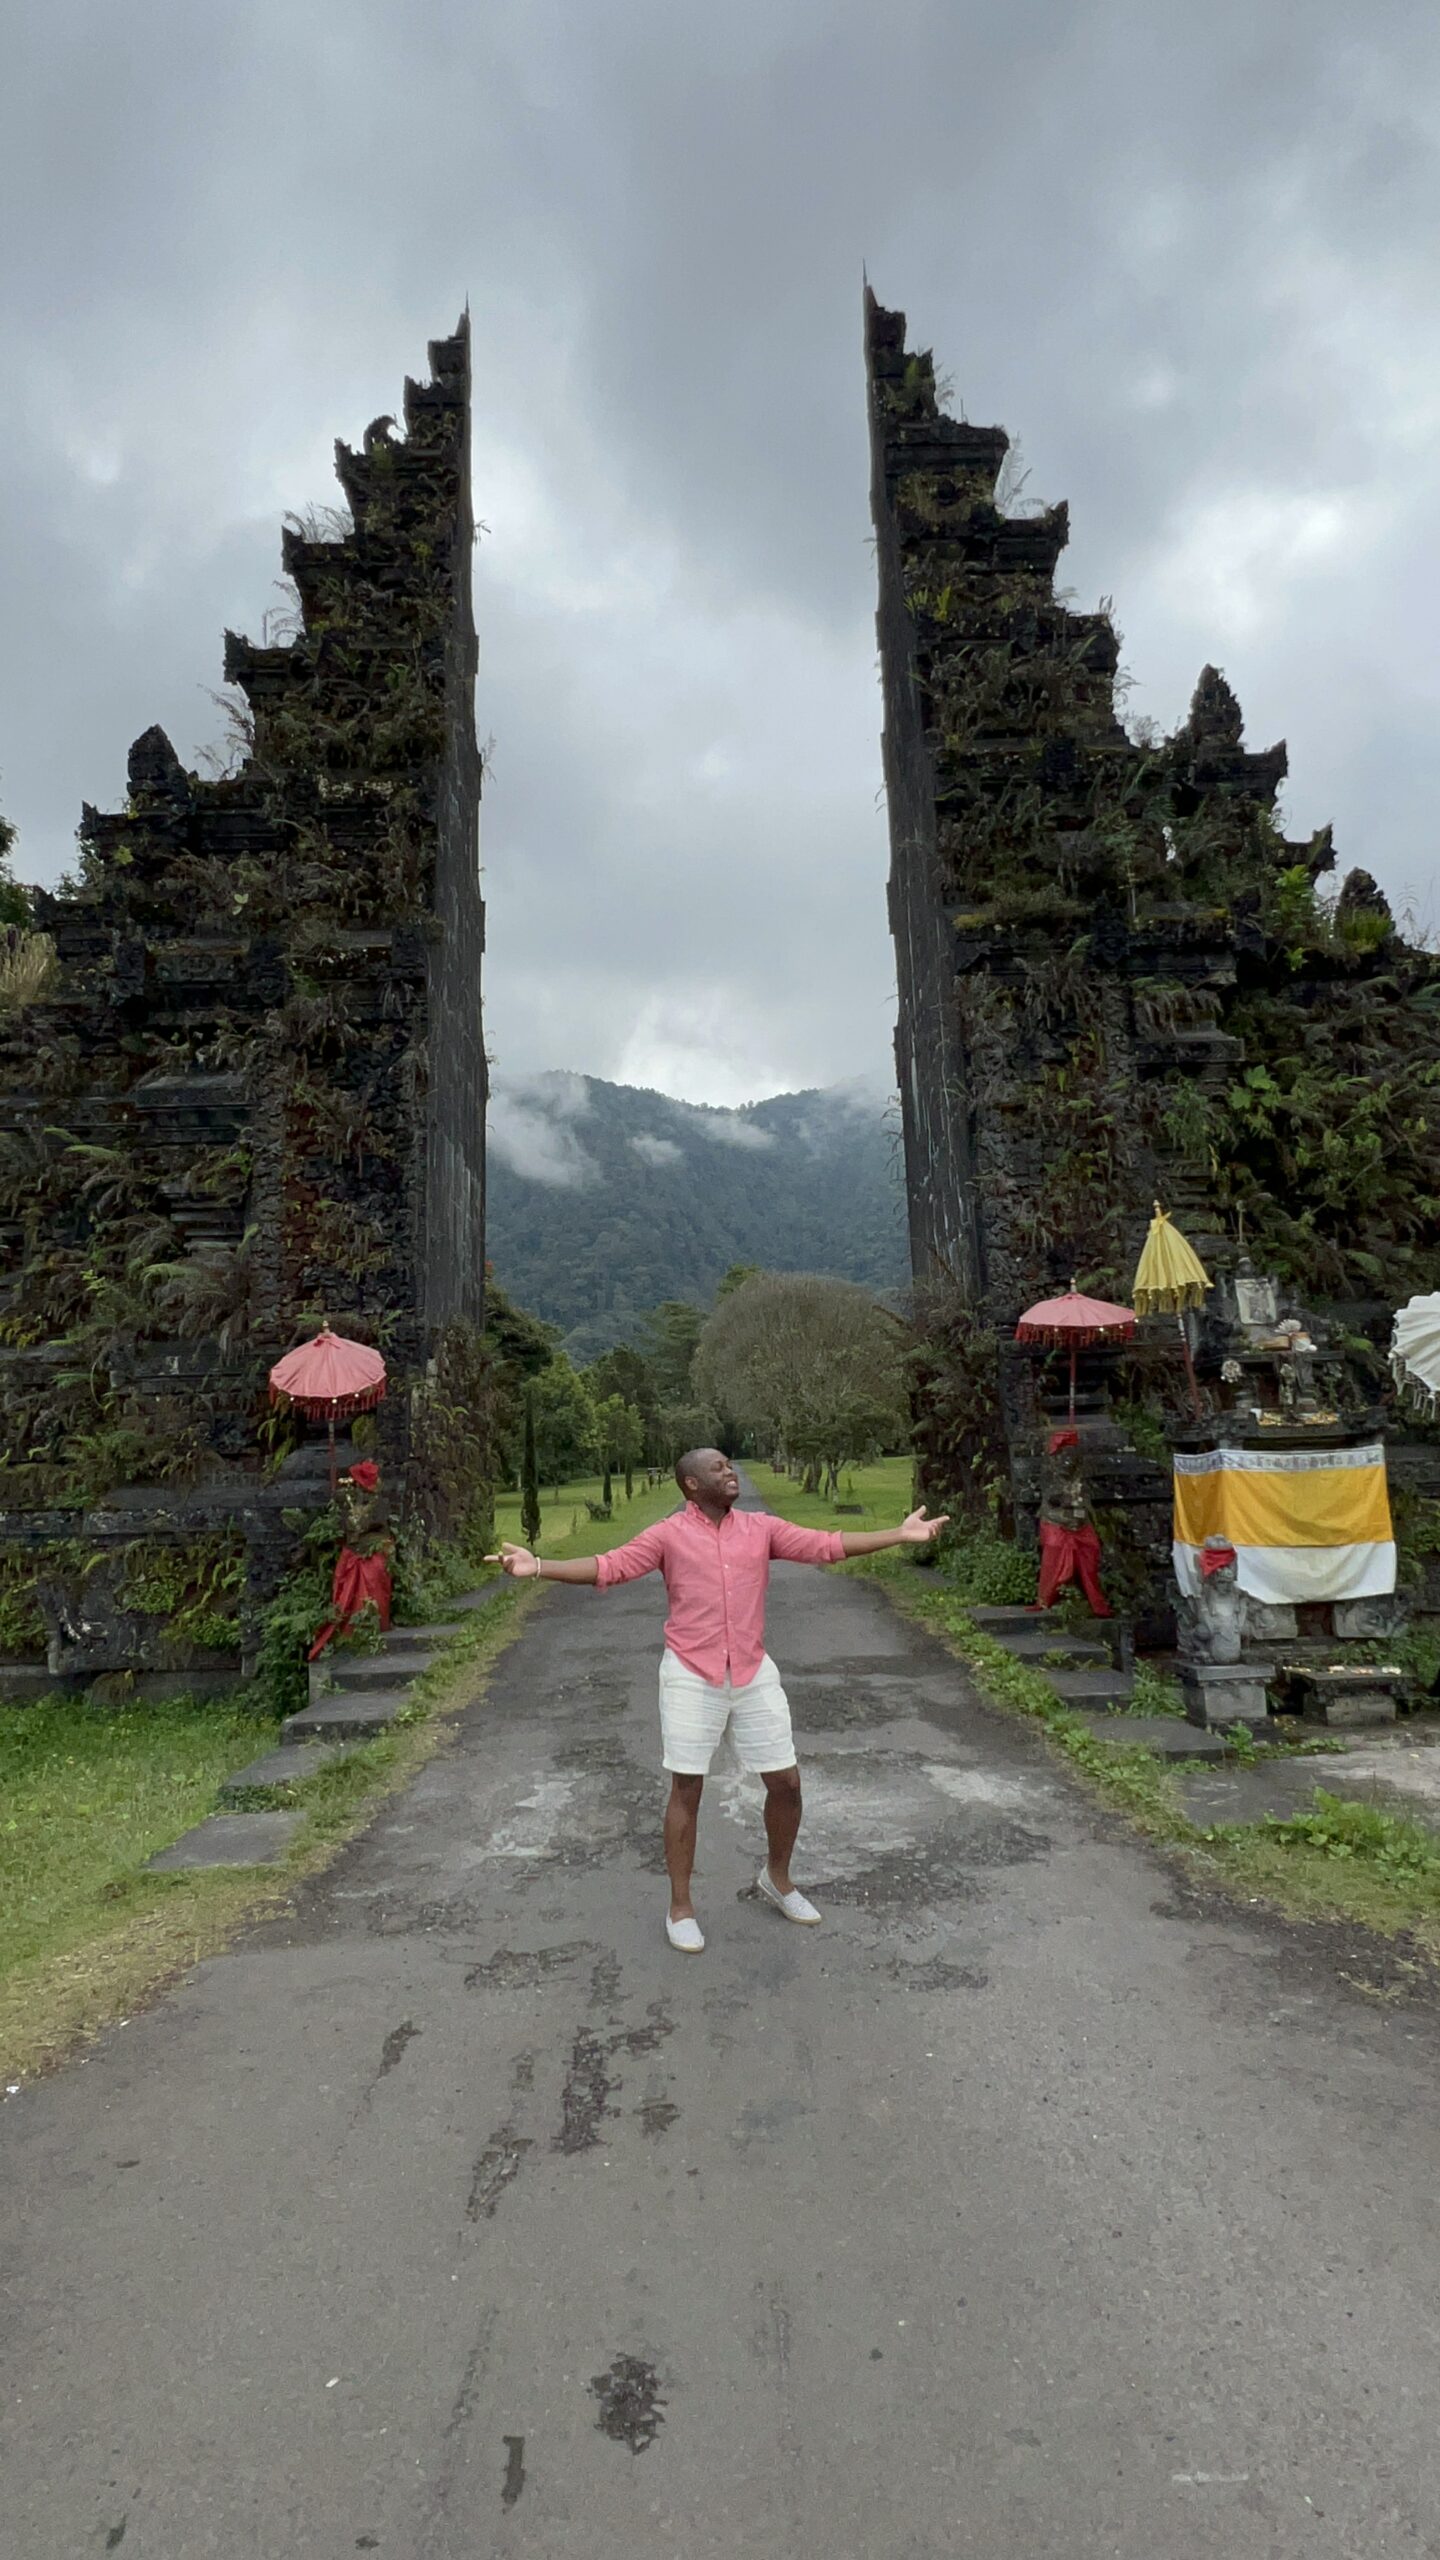 Man in a coral shirt and white shorts with arms spread wide, standing between the iconic split gates ('candi bentar') at the entrance to a Balinese temple, with misty mountains in the background